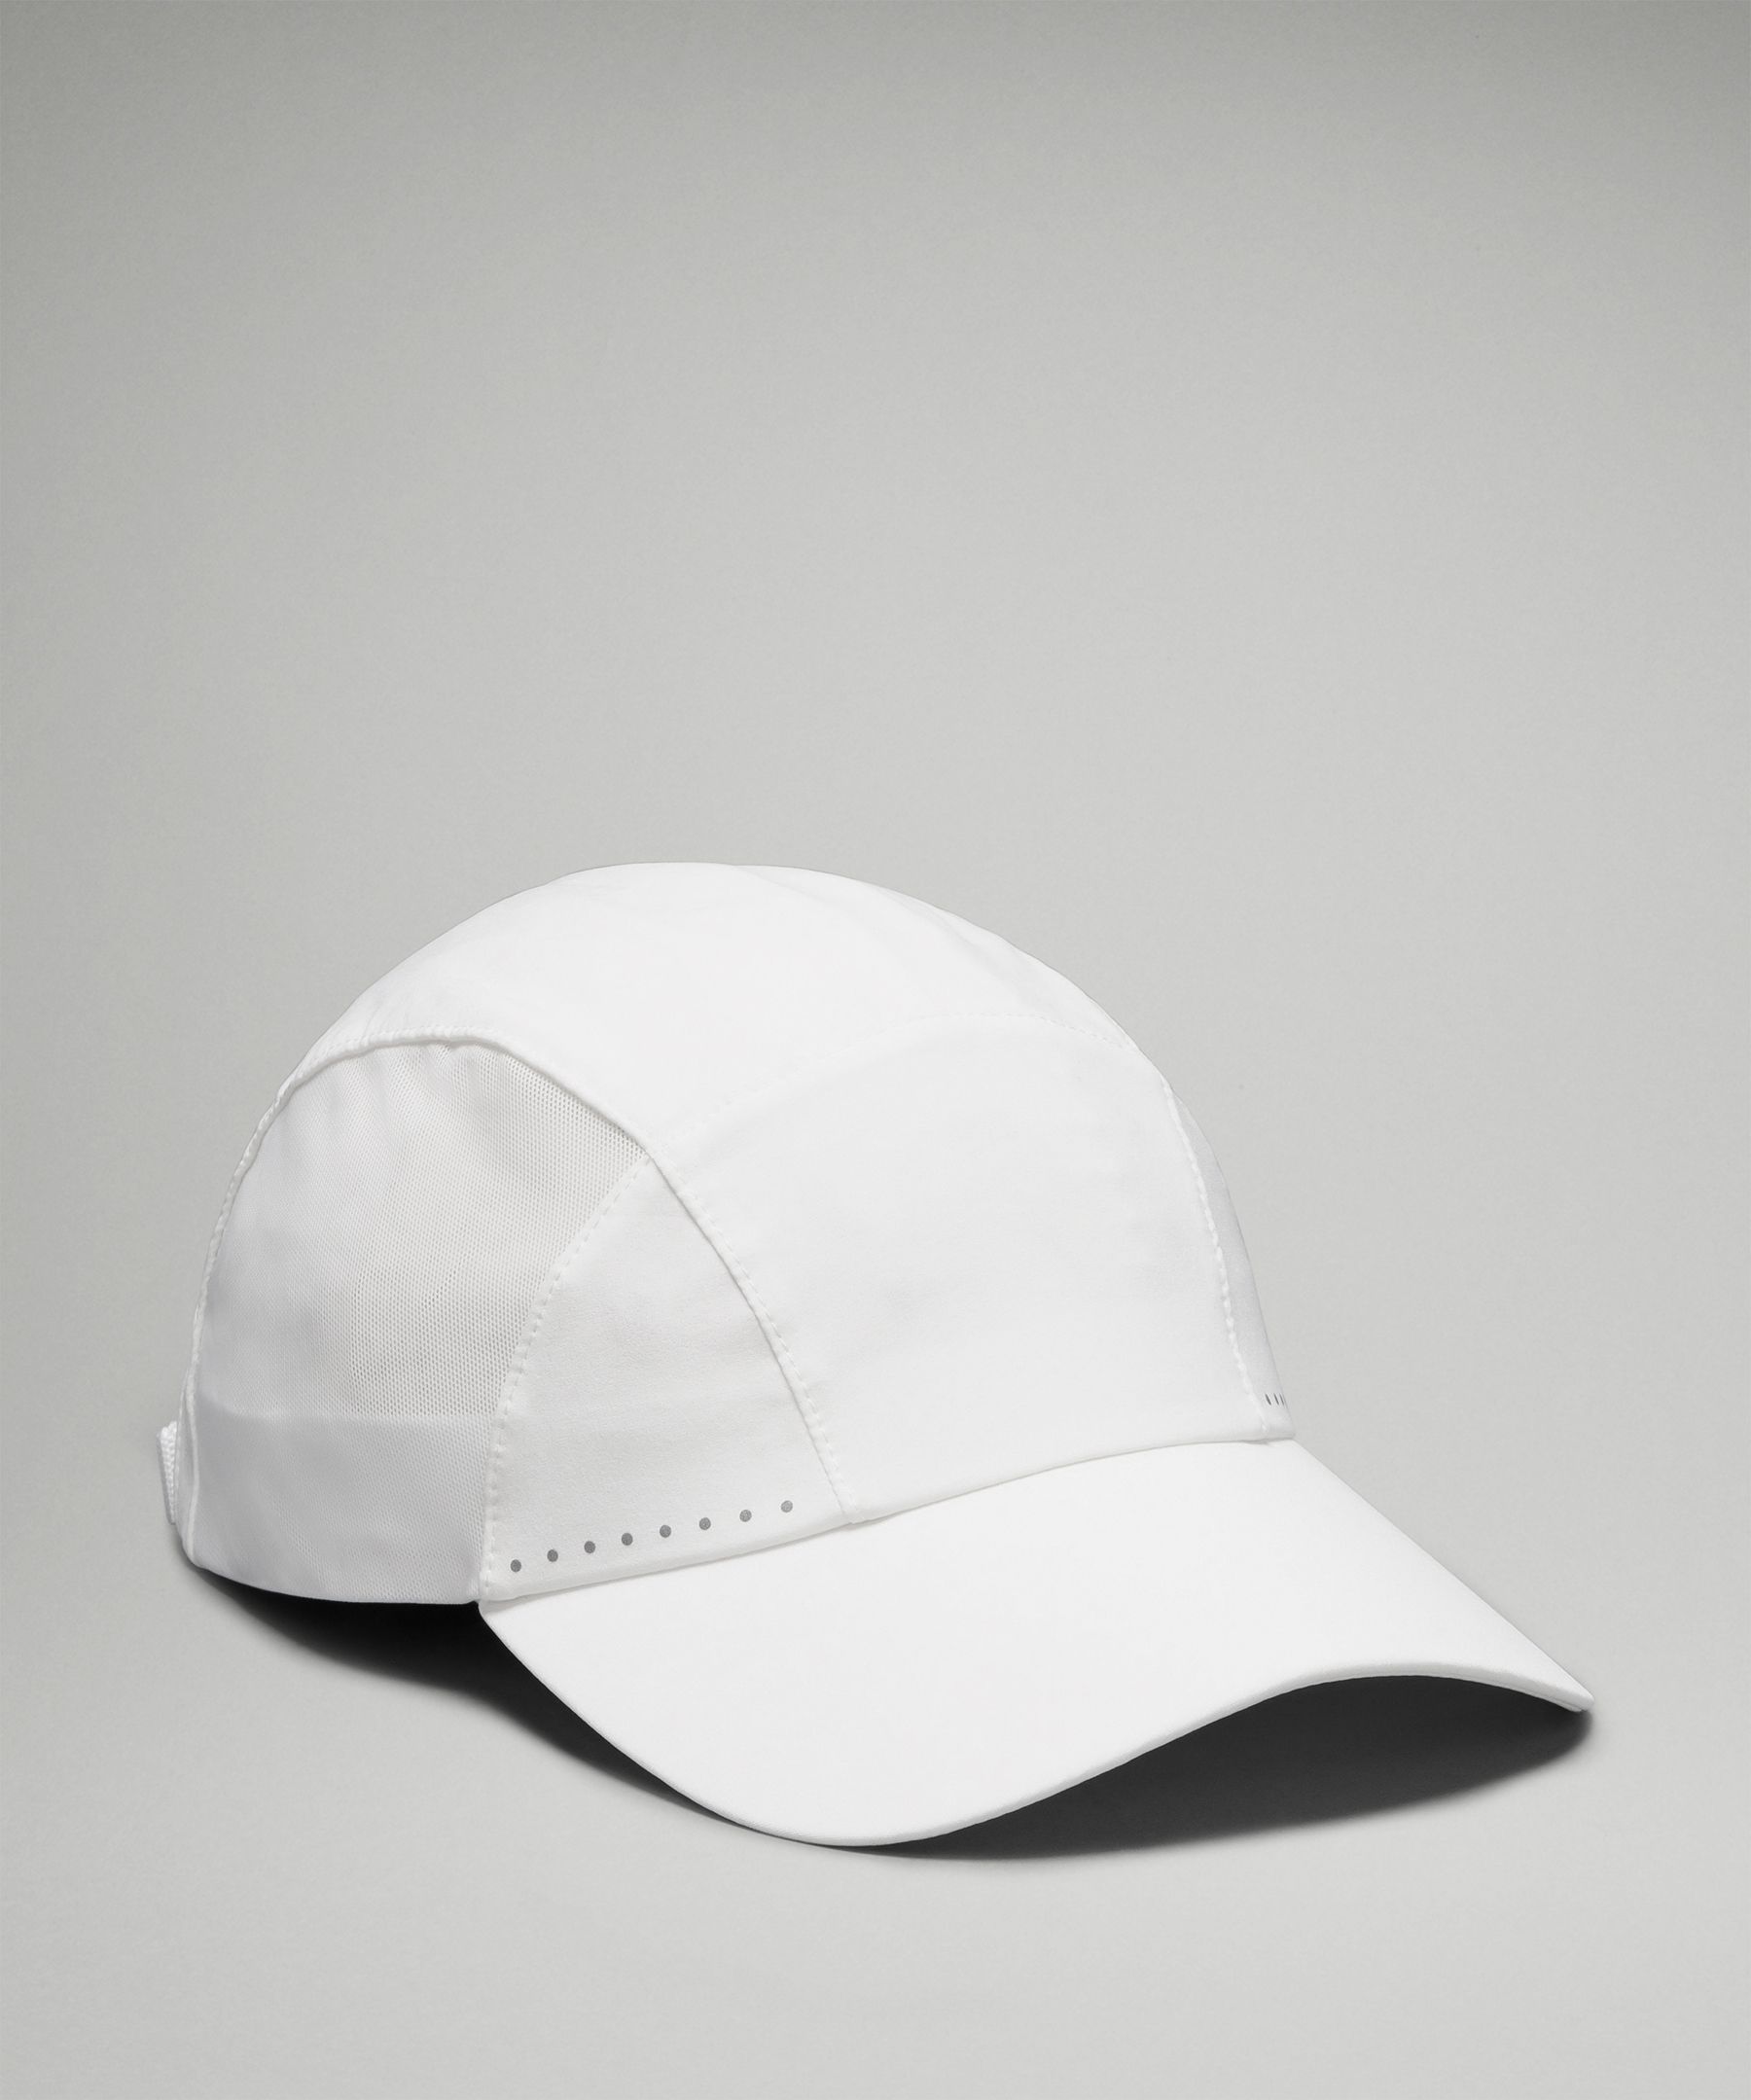 Lululemon Women's Fast and Free Running Hat Elite *Online Only. 1